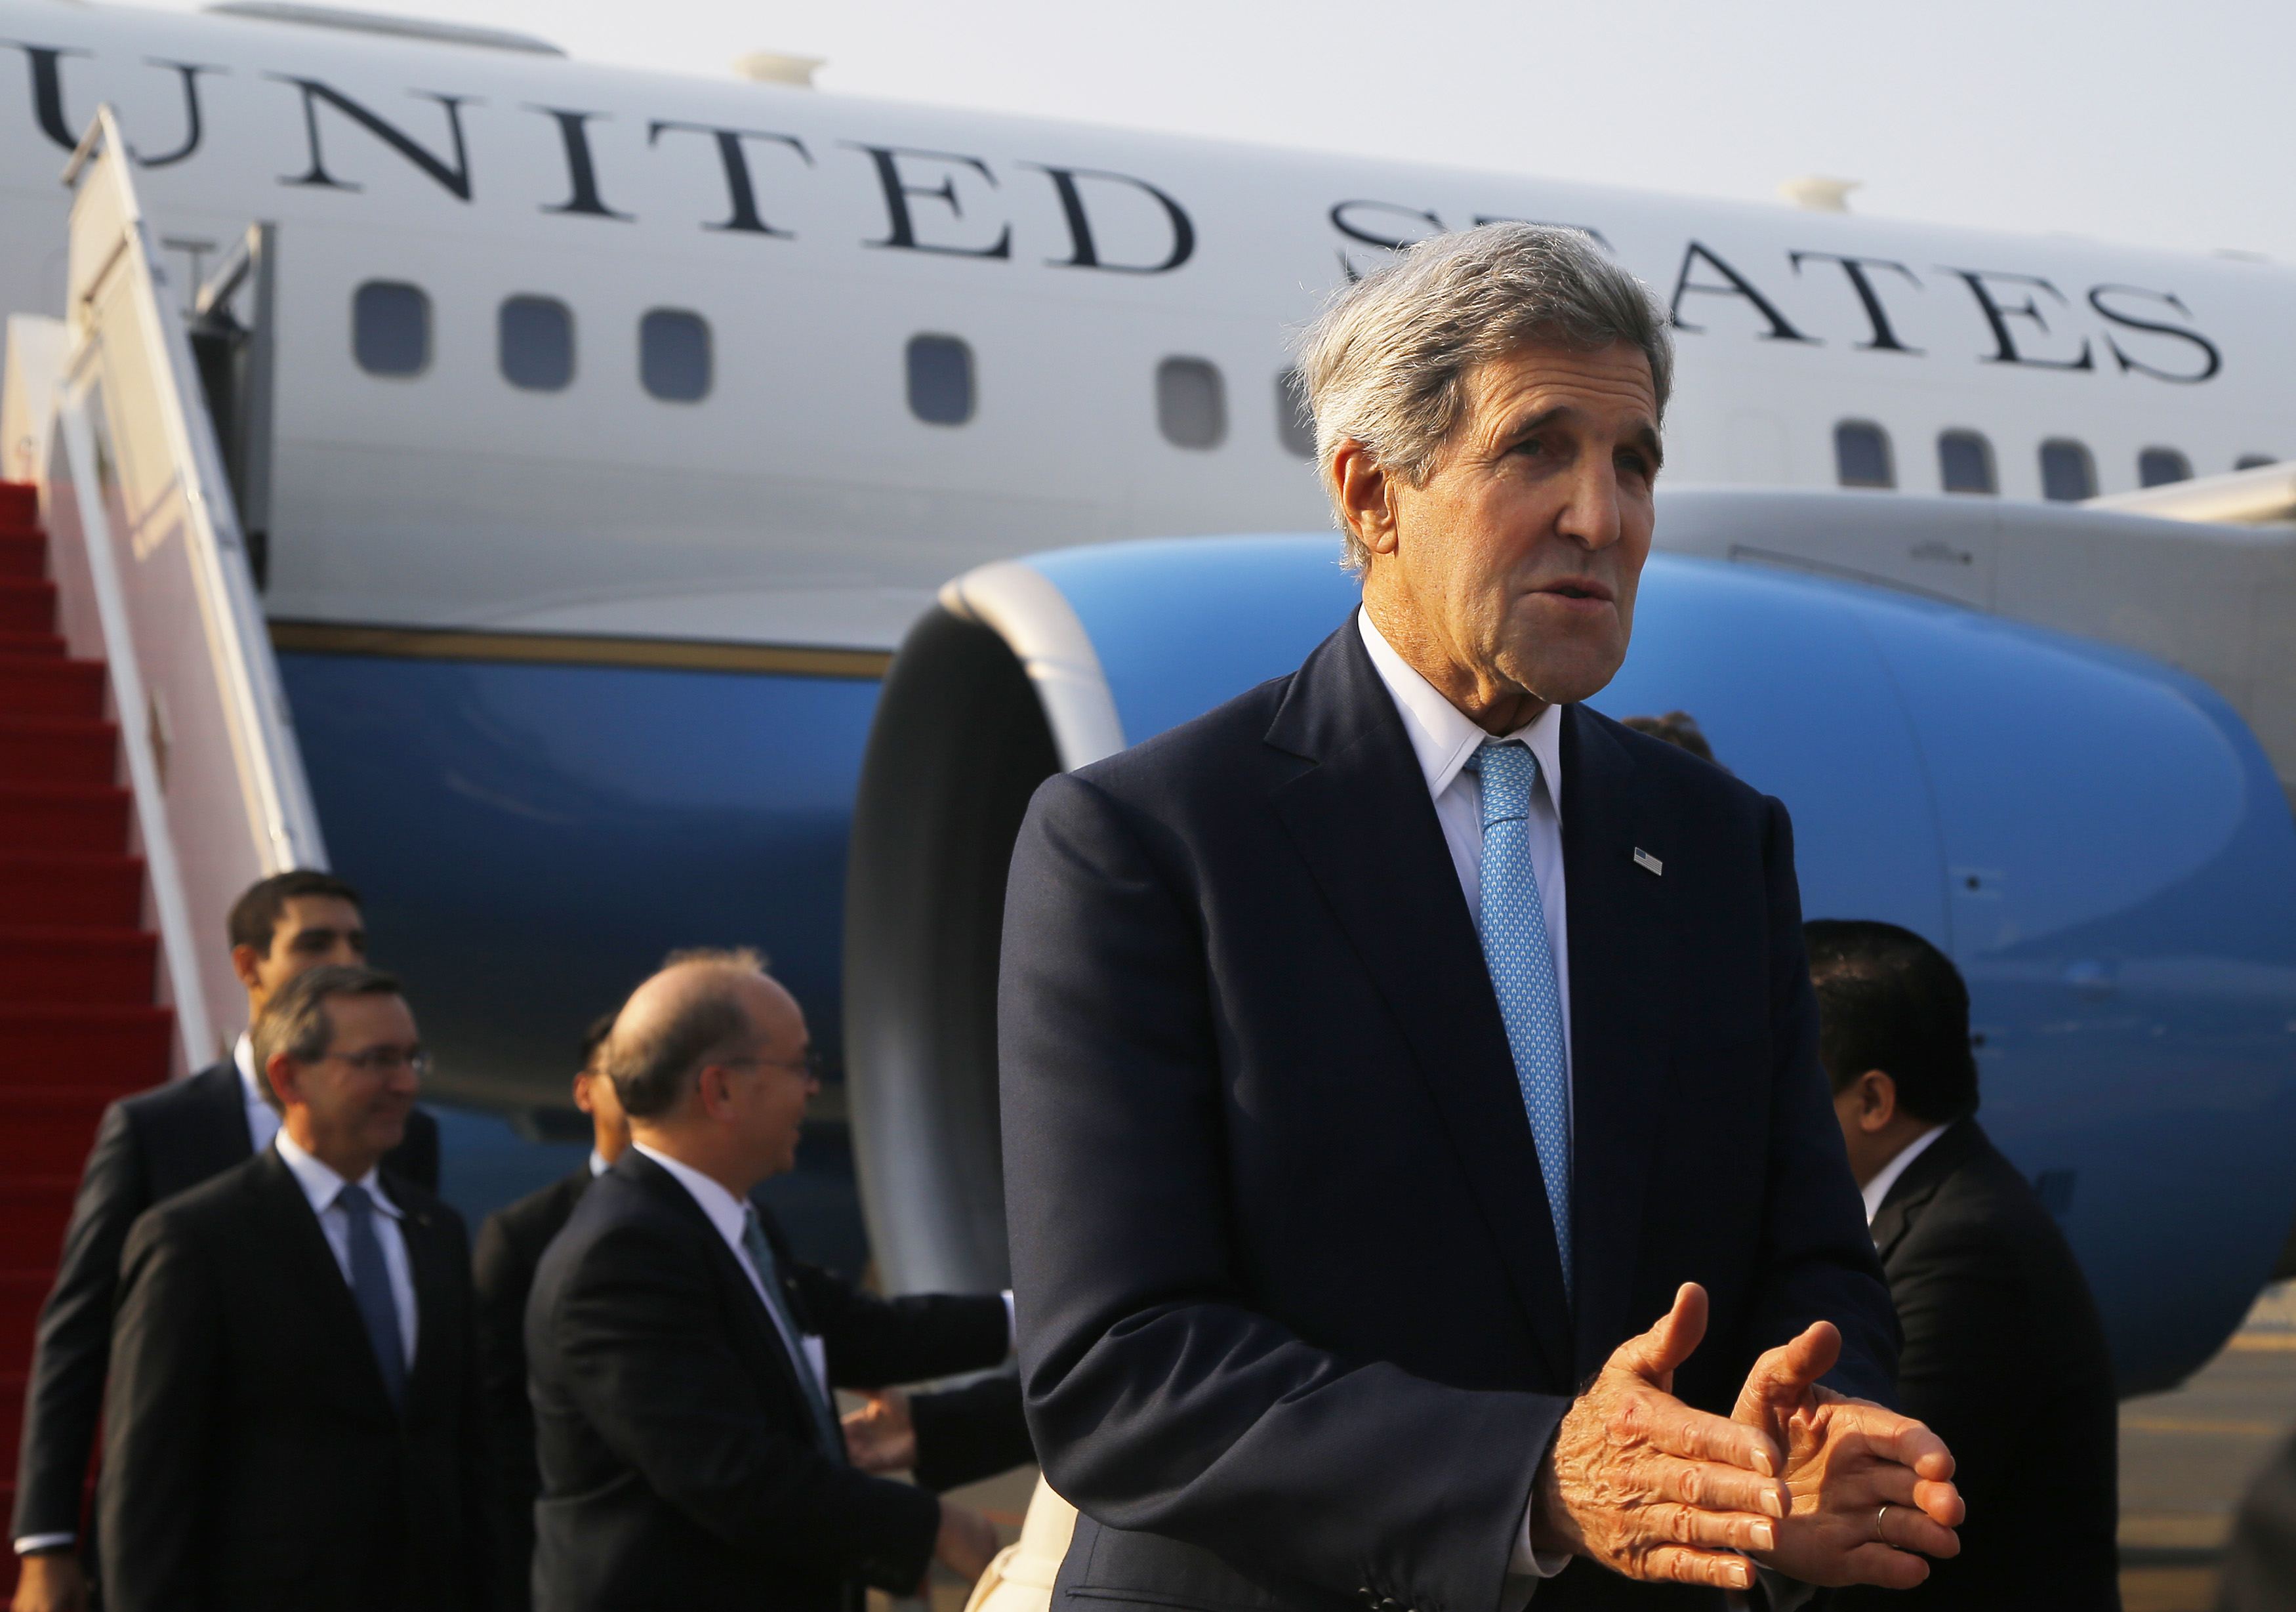 Kerry in Indonesia seeking Asian support against Islamic state